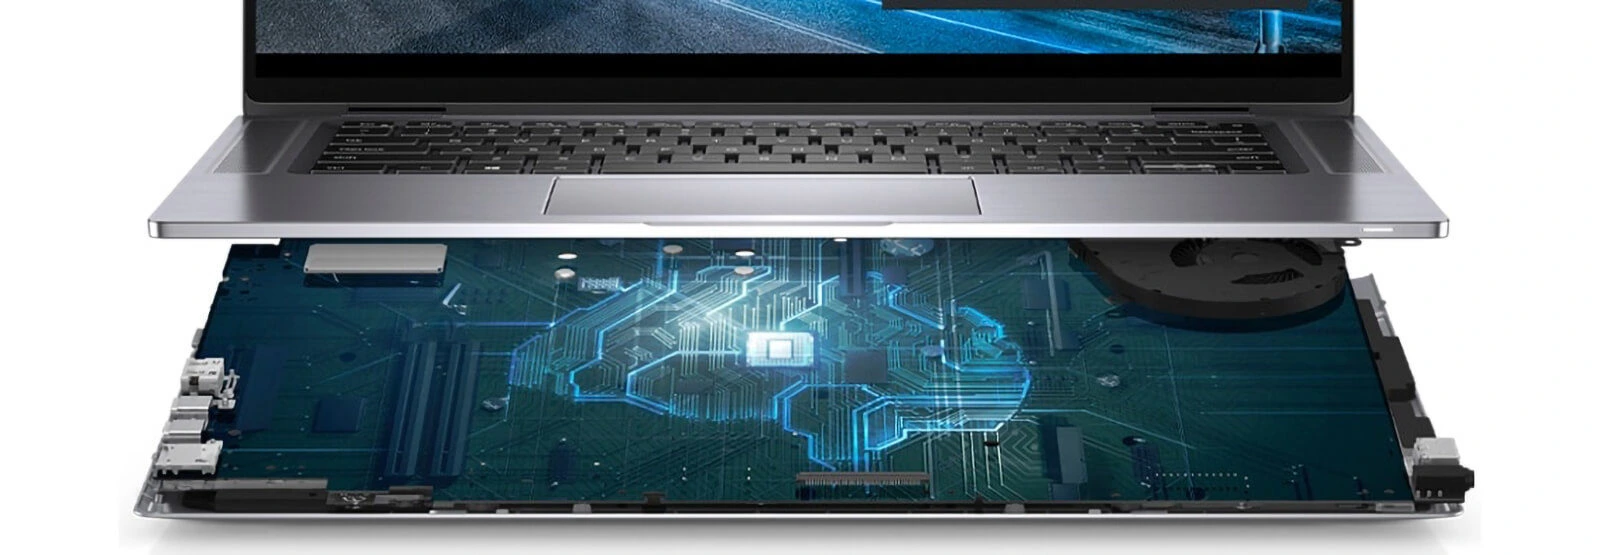 Dell Latitude 7310 (2020) Features 02